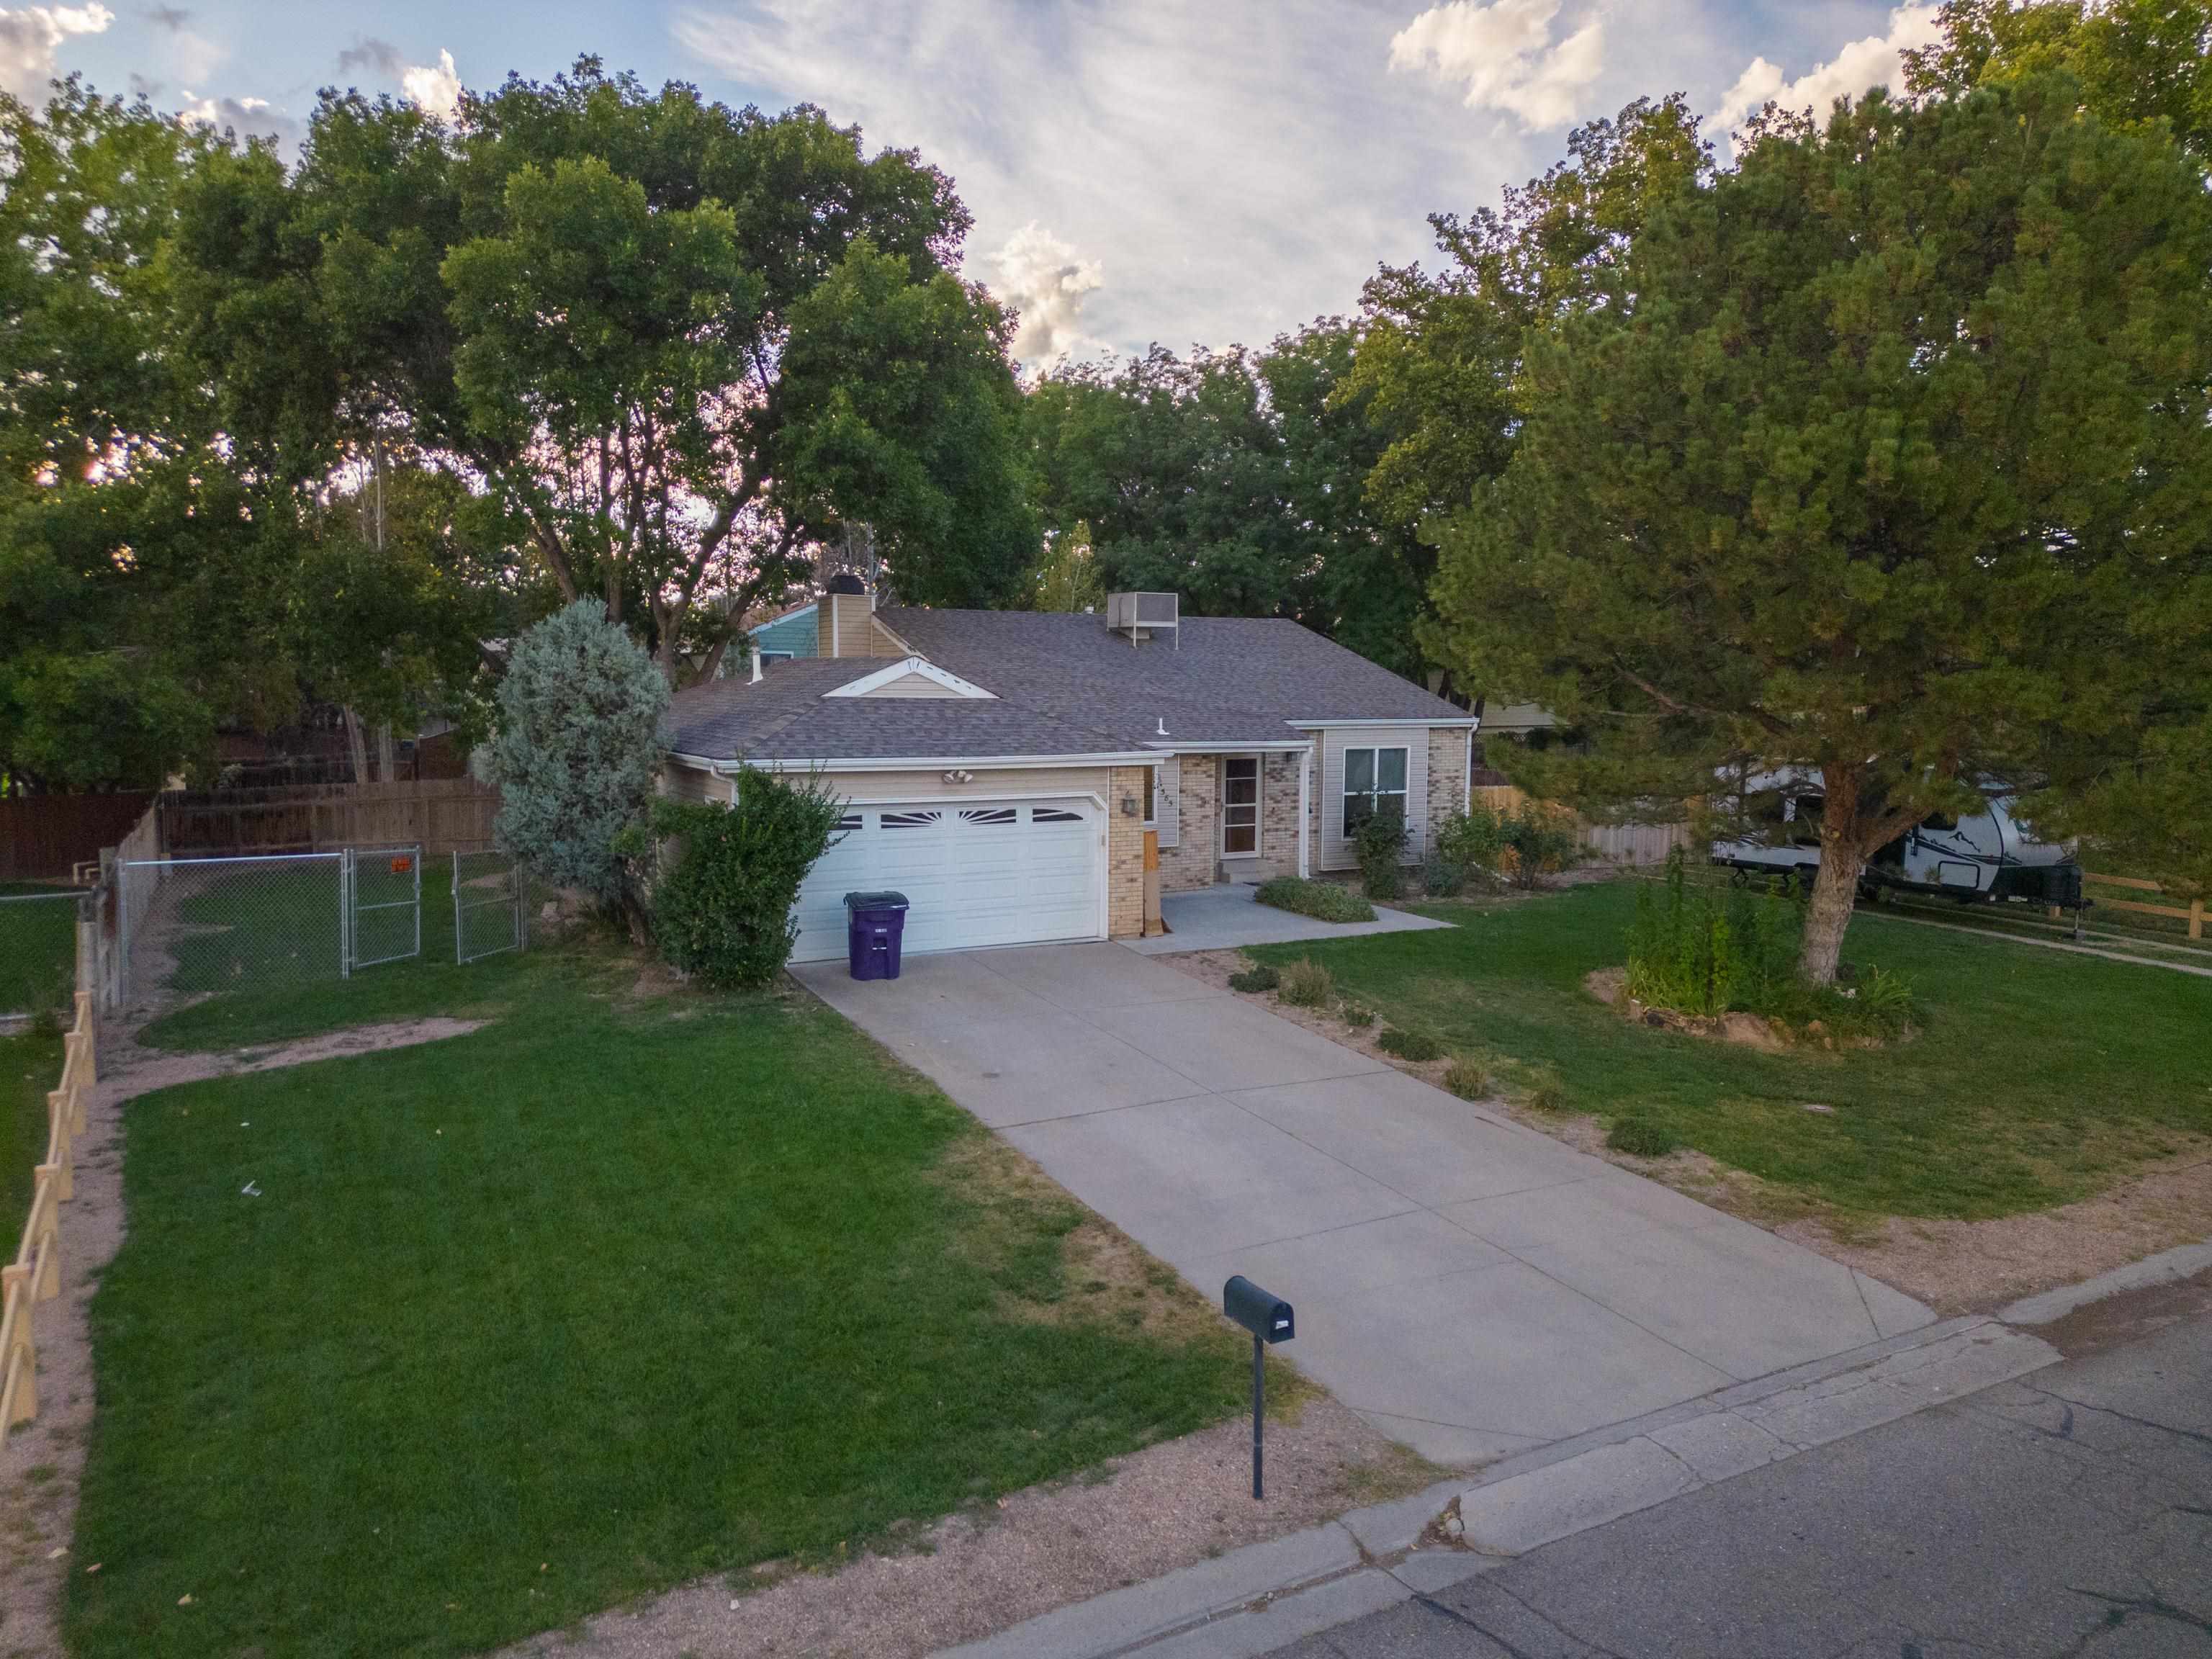 585 31 Road, Grand Junction, CO 81504